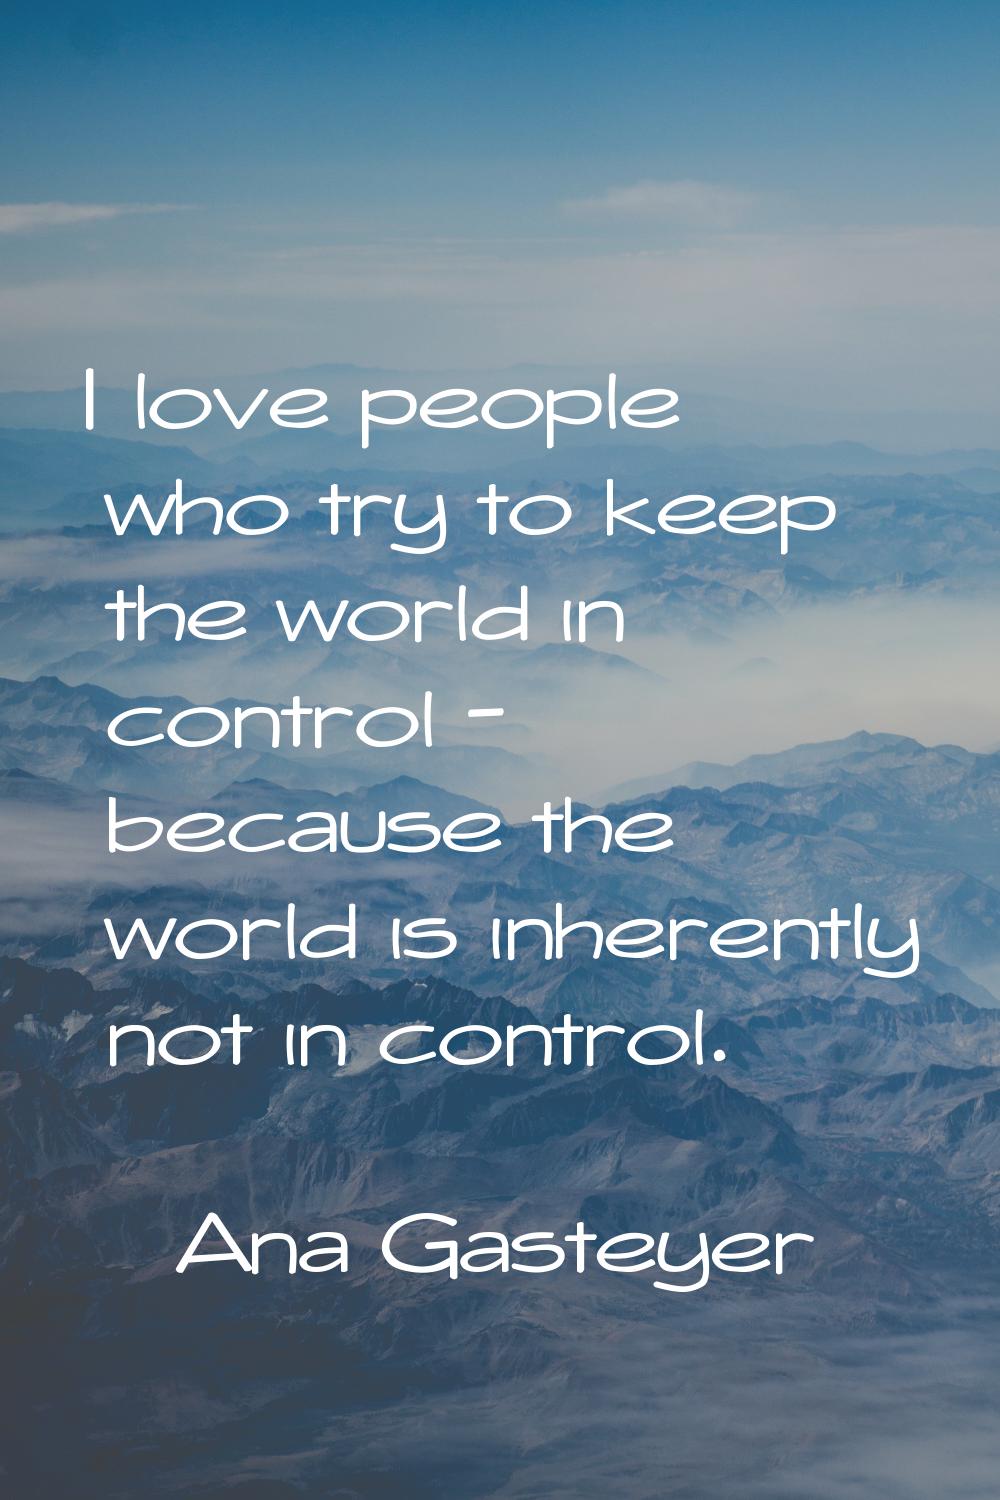 I love people who try to keep the world in control - because the world is inherently not in control